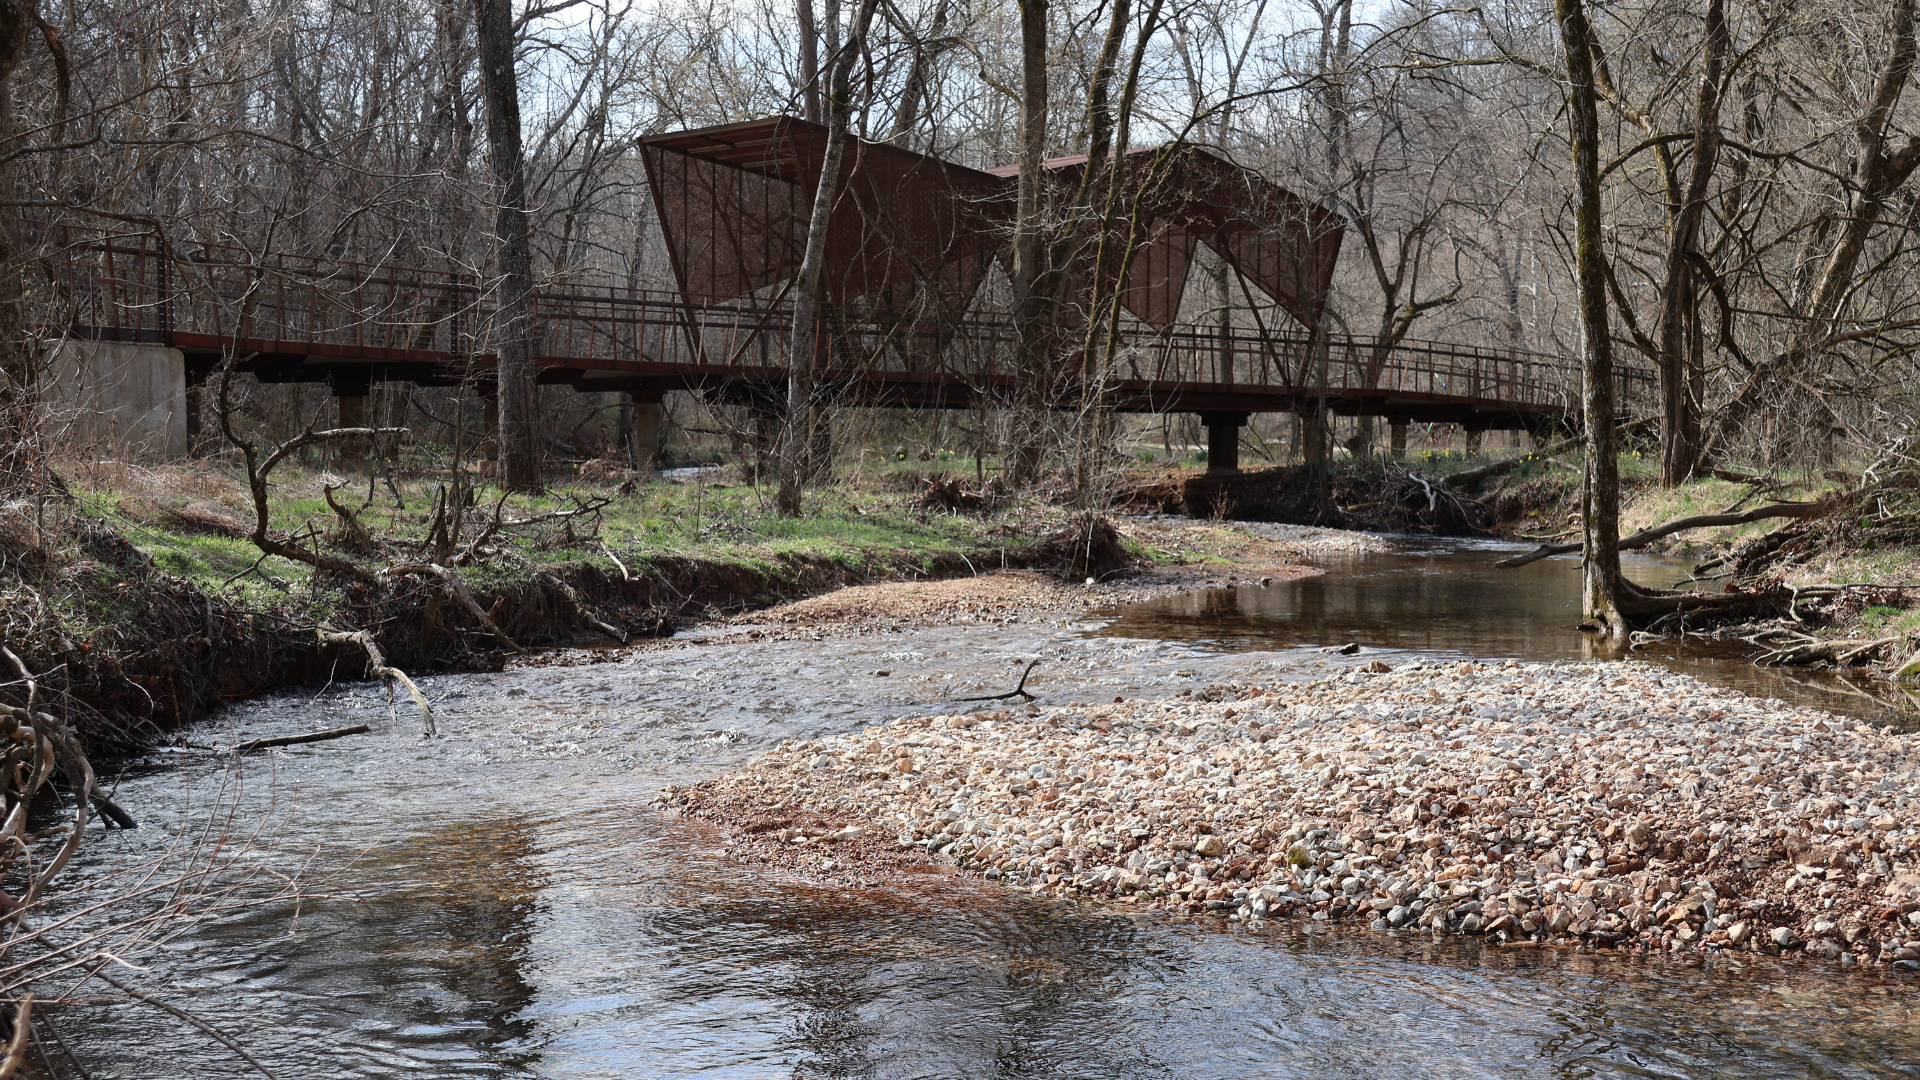 image of one of the iron bridges at Coler over a creek in the springtime